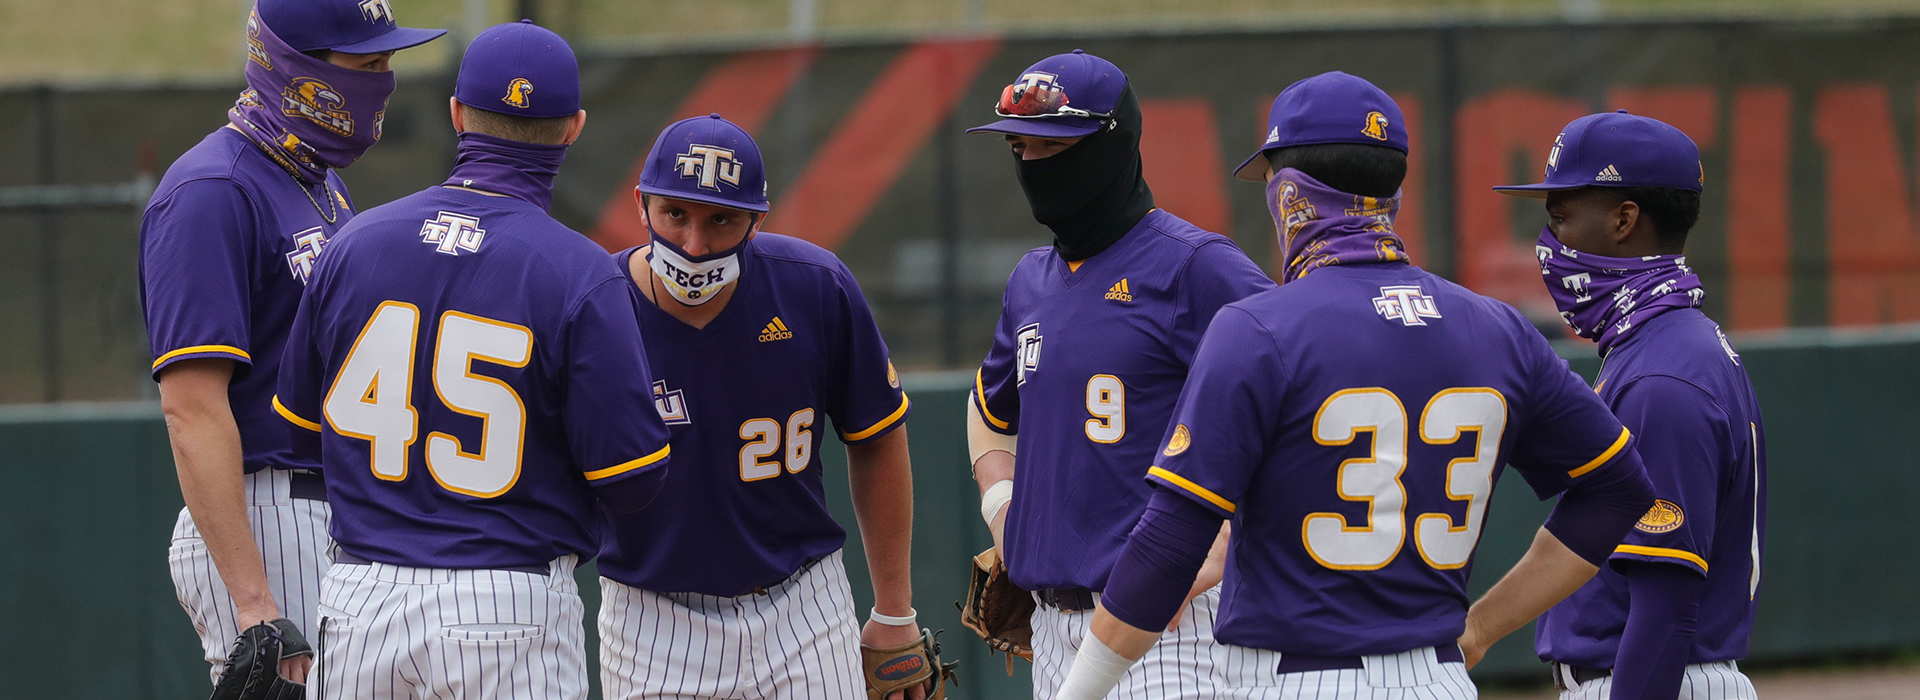 Tech baseball hosts in-state foe Belmont in Tuesday tilt with no OVC implications